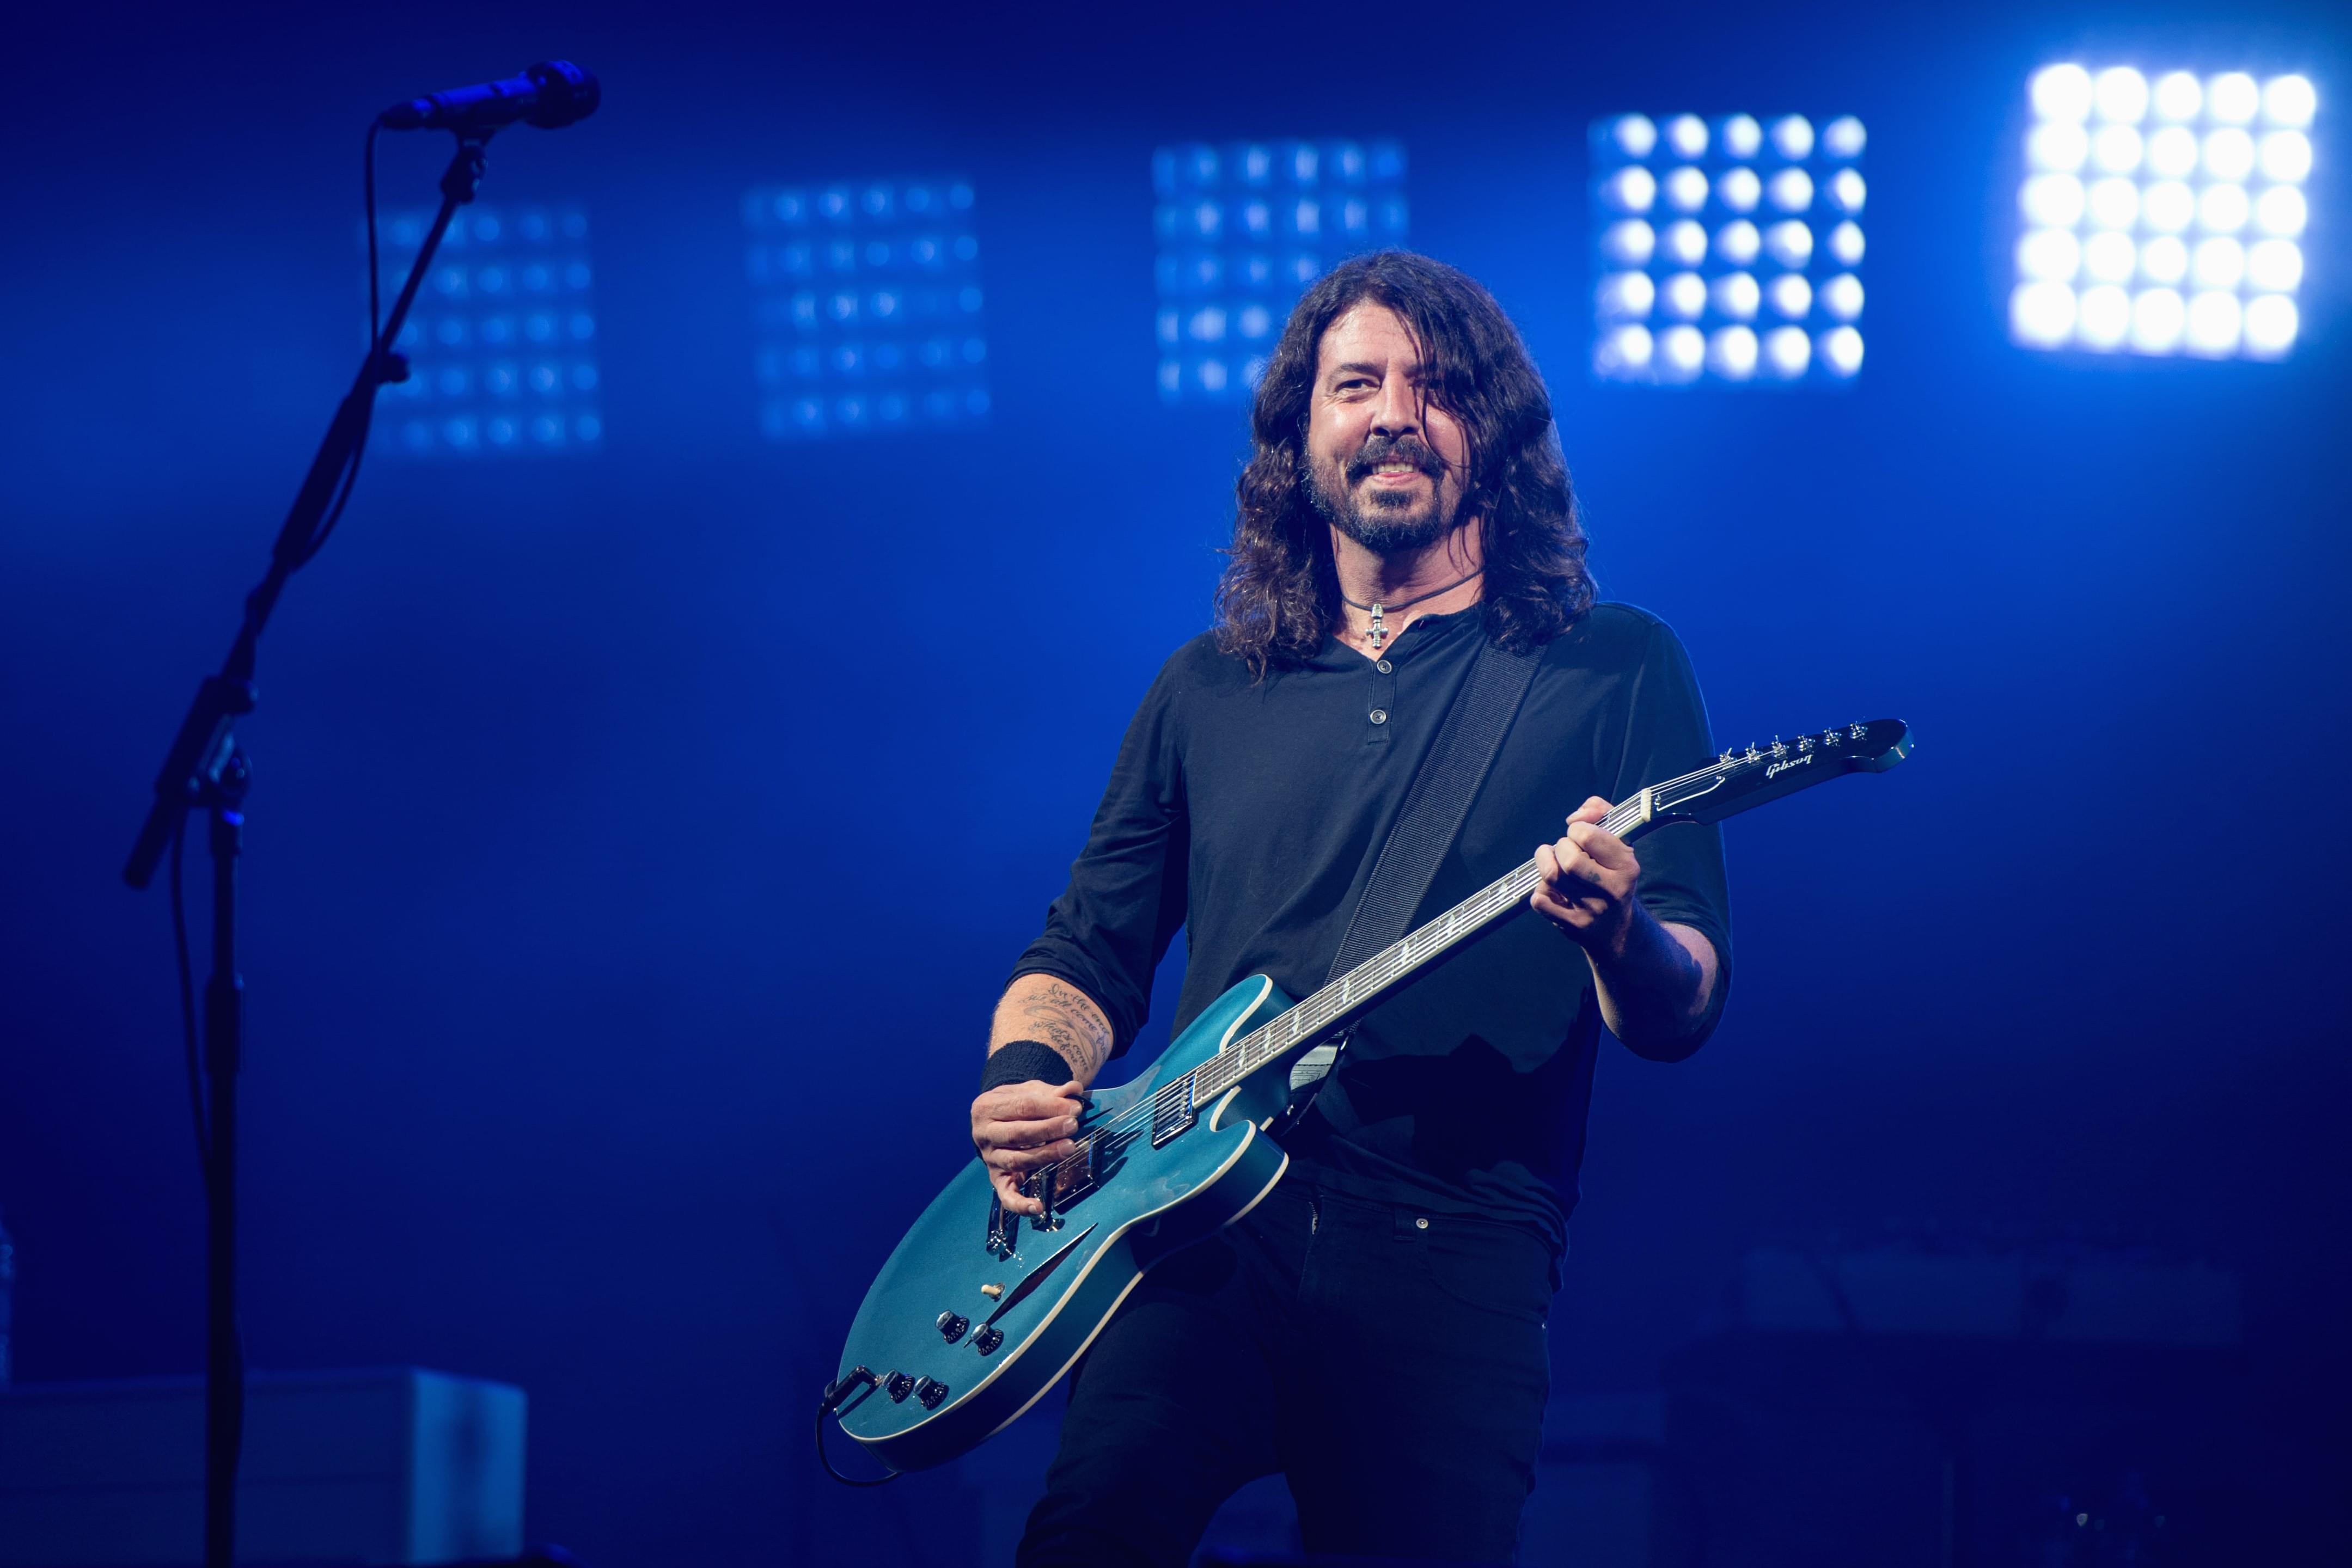 Foo Fighters Announce New Album, Release First Single ‘Rescued’ [AUDIO]